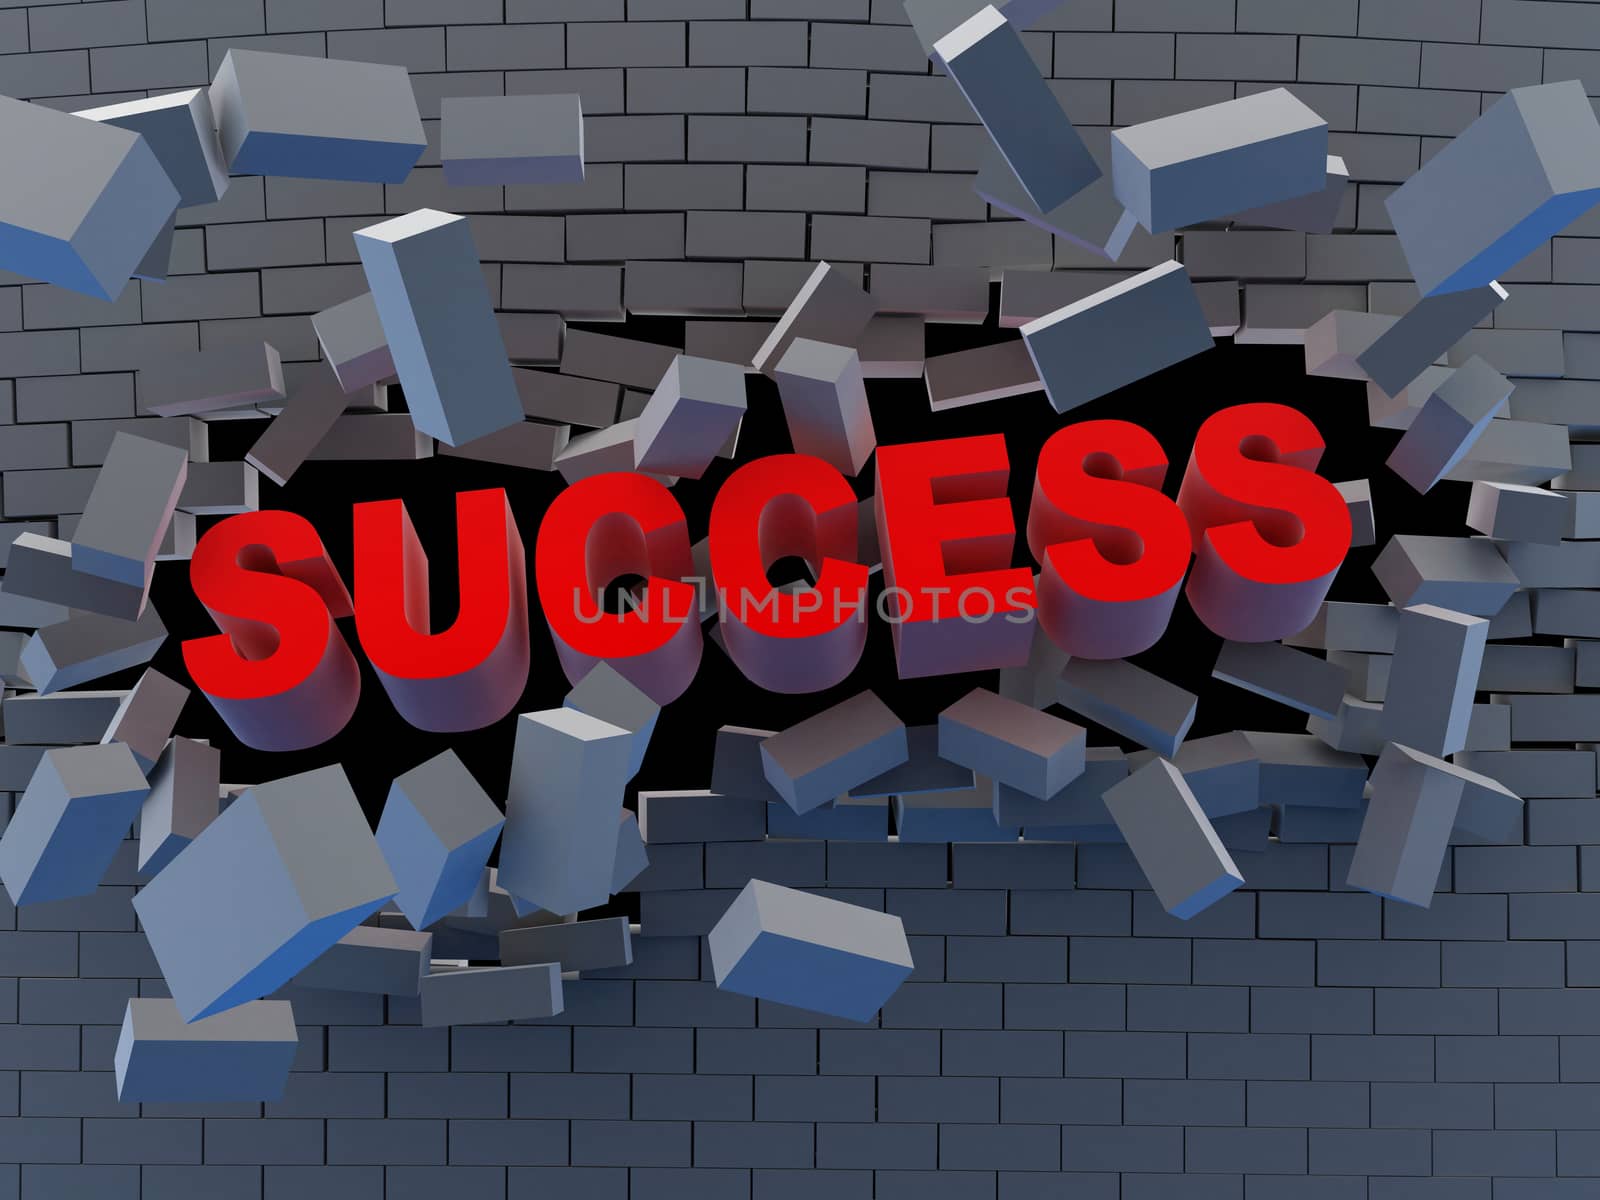 Abstract break wall. Symbol success (done in 3d)